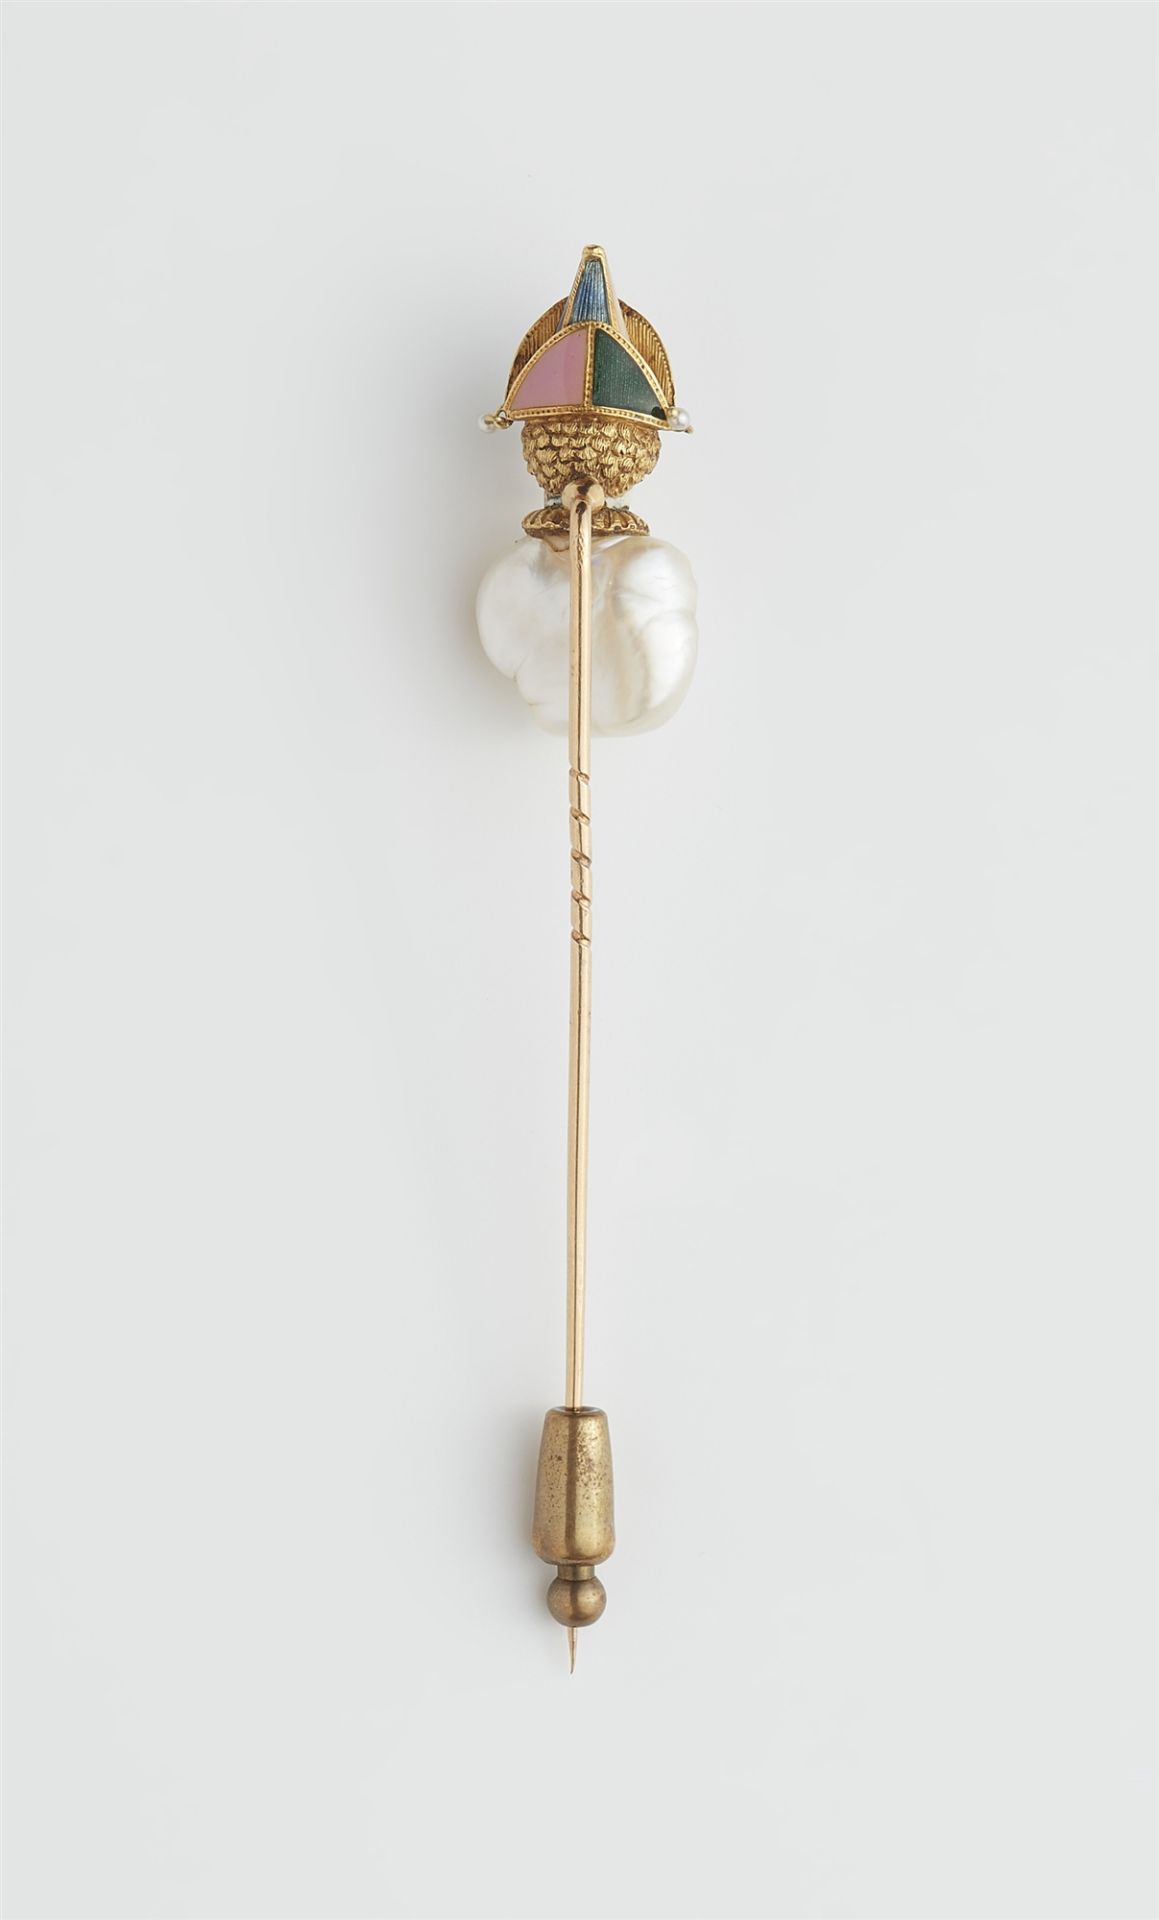 A French 18k gold enamel and baroque blister pearl pin. - Image 6 of 6